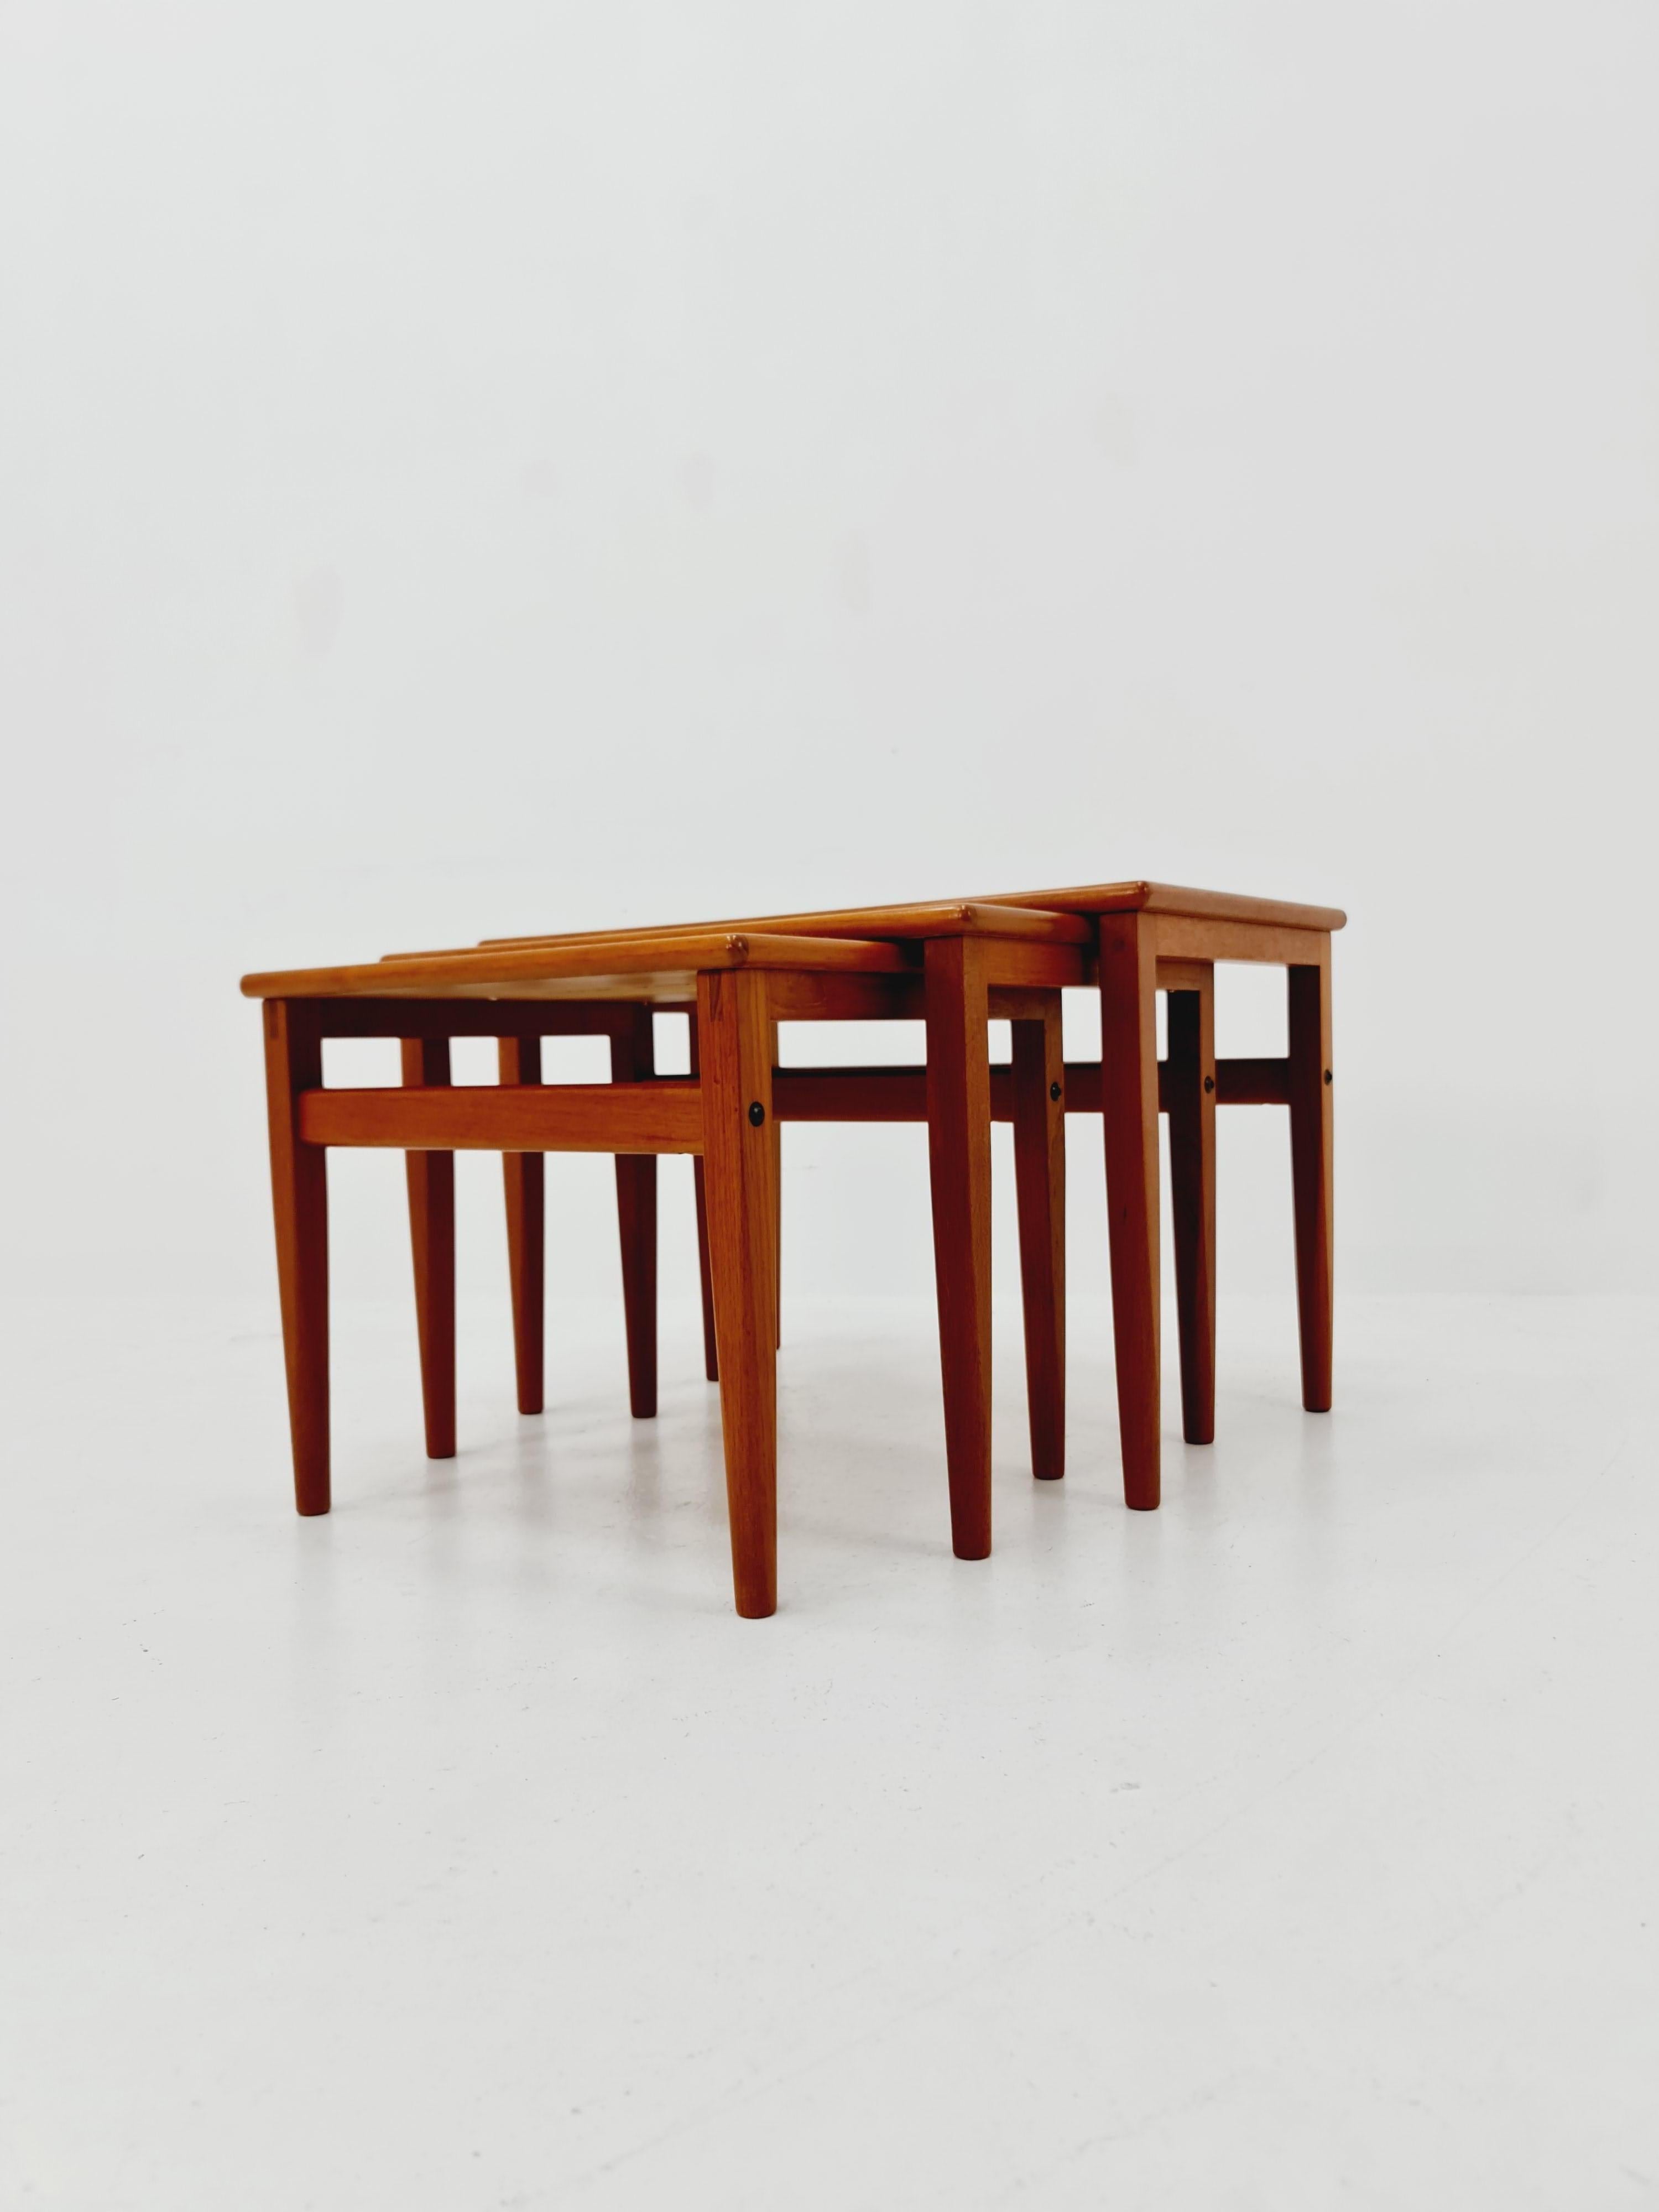 Midcentury danish teak + ceramic By OX Art  nesting tables/ side tables by Trioh  1970s

By Trioh & Ox Art 

Made in Denmark  

Amazing condition, no scratches or damage. 

Usable as a additional tables in the living room

Measurements big